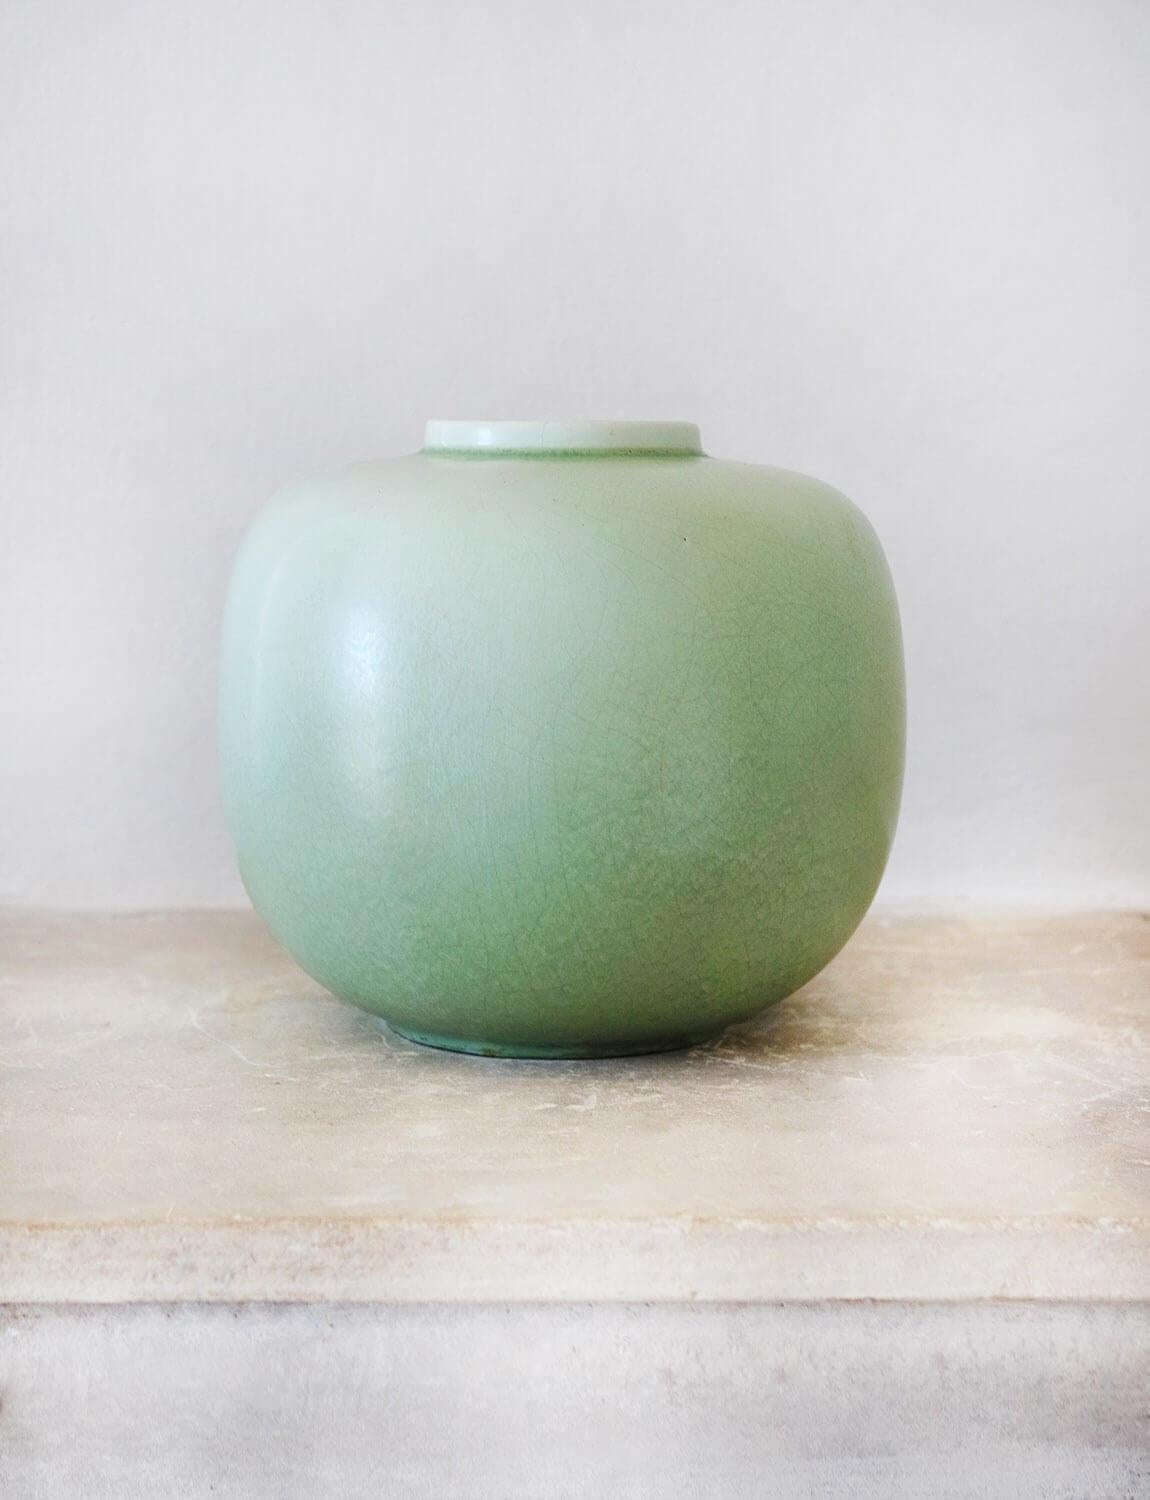 Celadon vase designed by Guido Andlovitz for the ceramics house, Società Ceramica Italiana, Lavenia where he was the Art Director in the 1930s. Guido Andlovitz (1900-1971) was a renowned Italian ceramicist whose work is exhibited all over Italy in